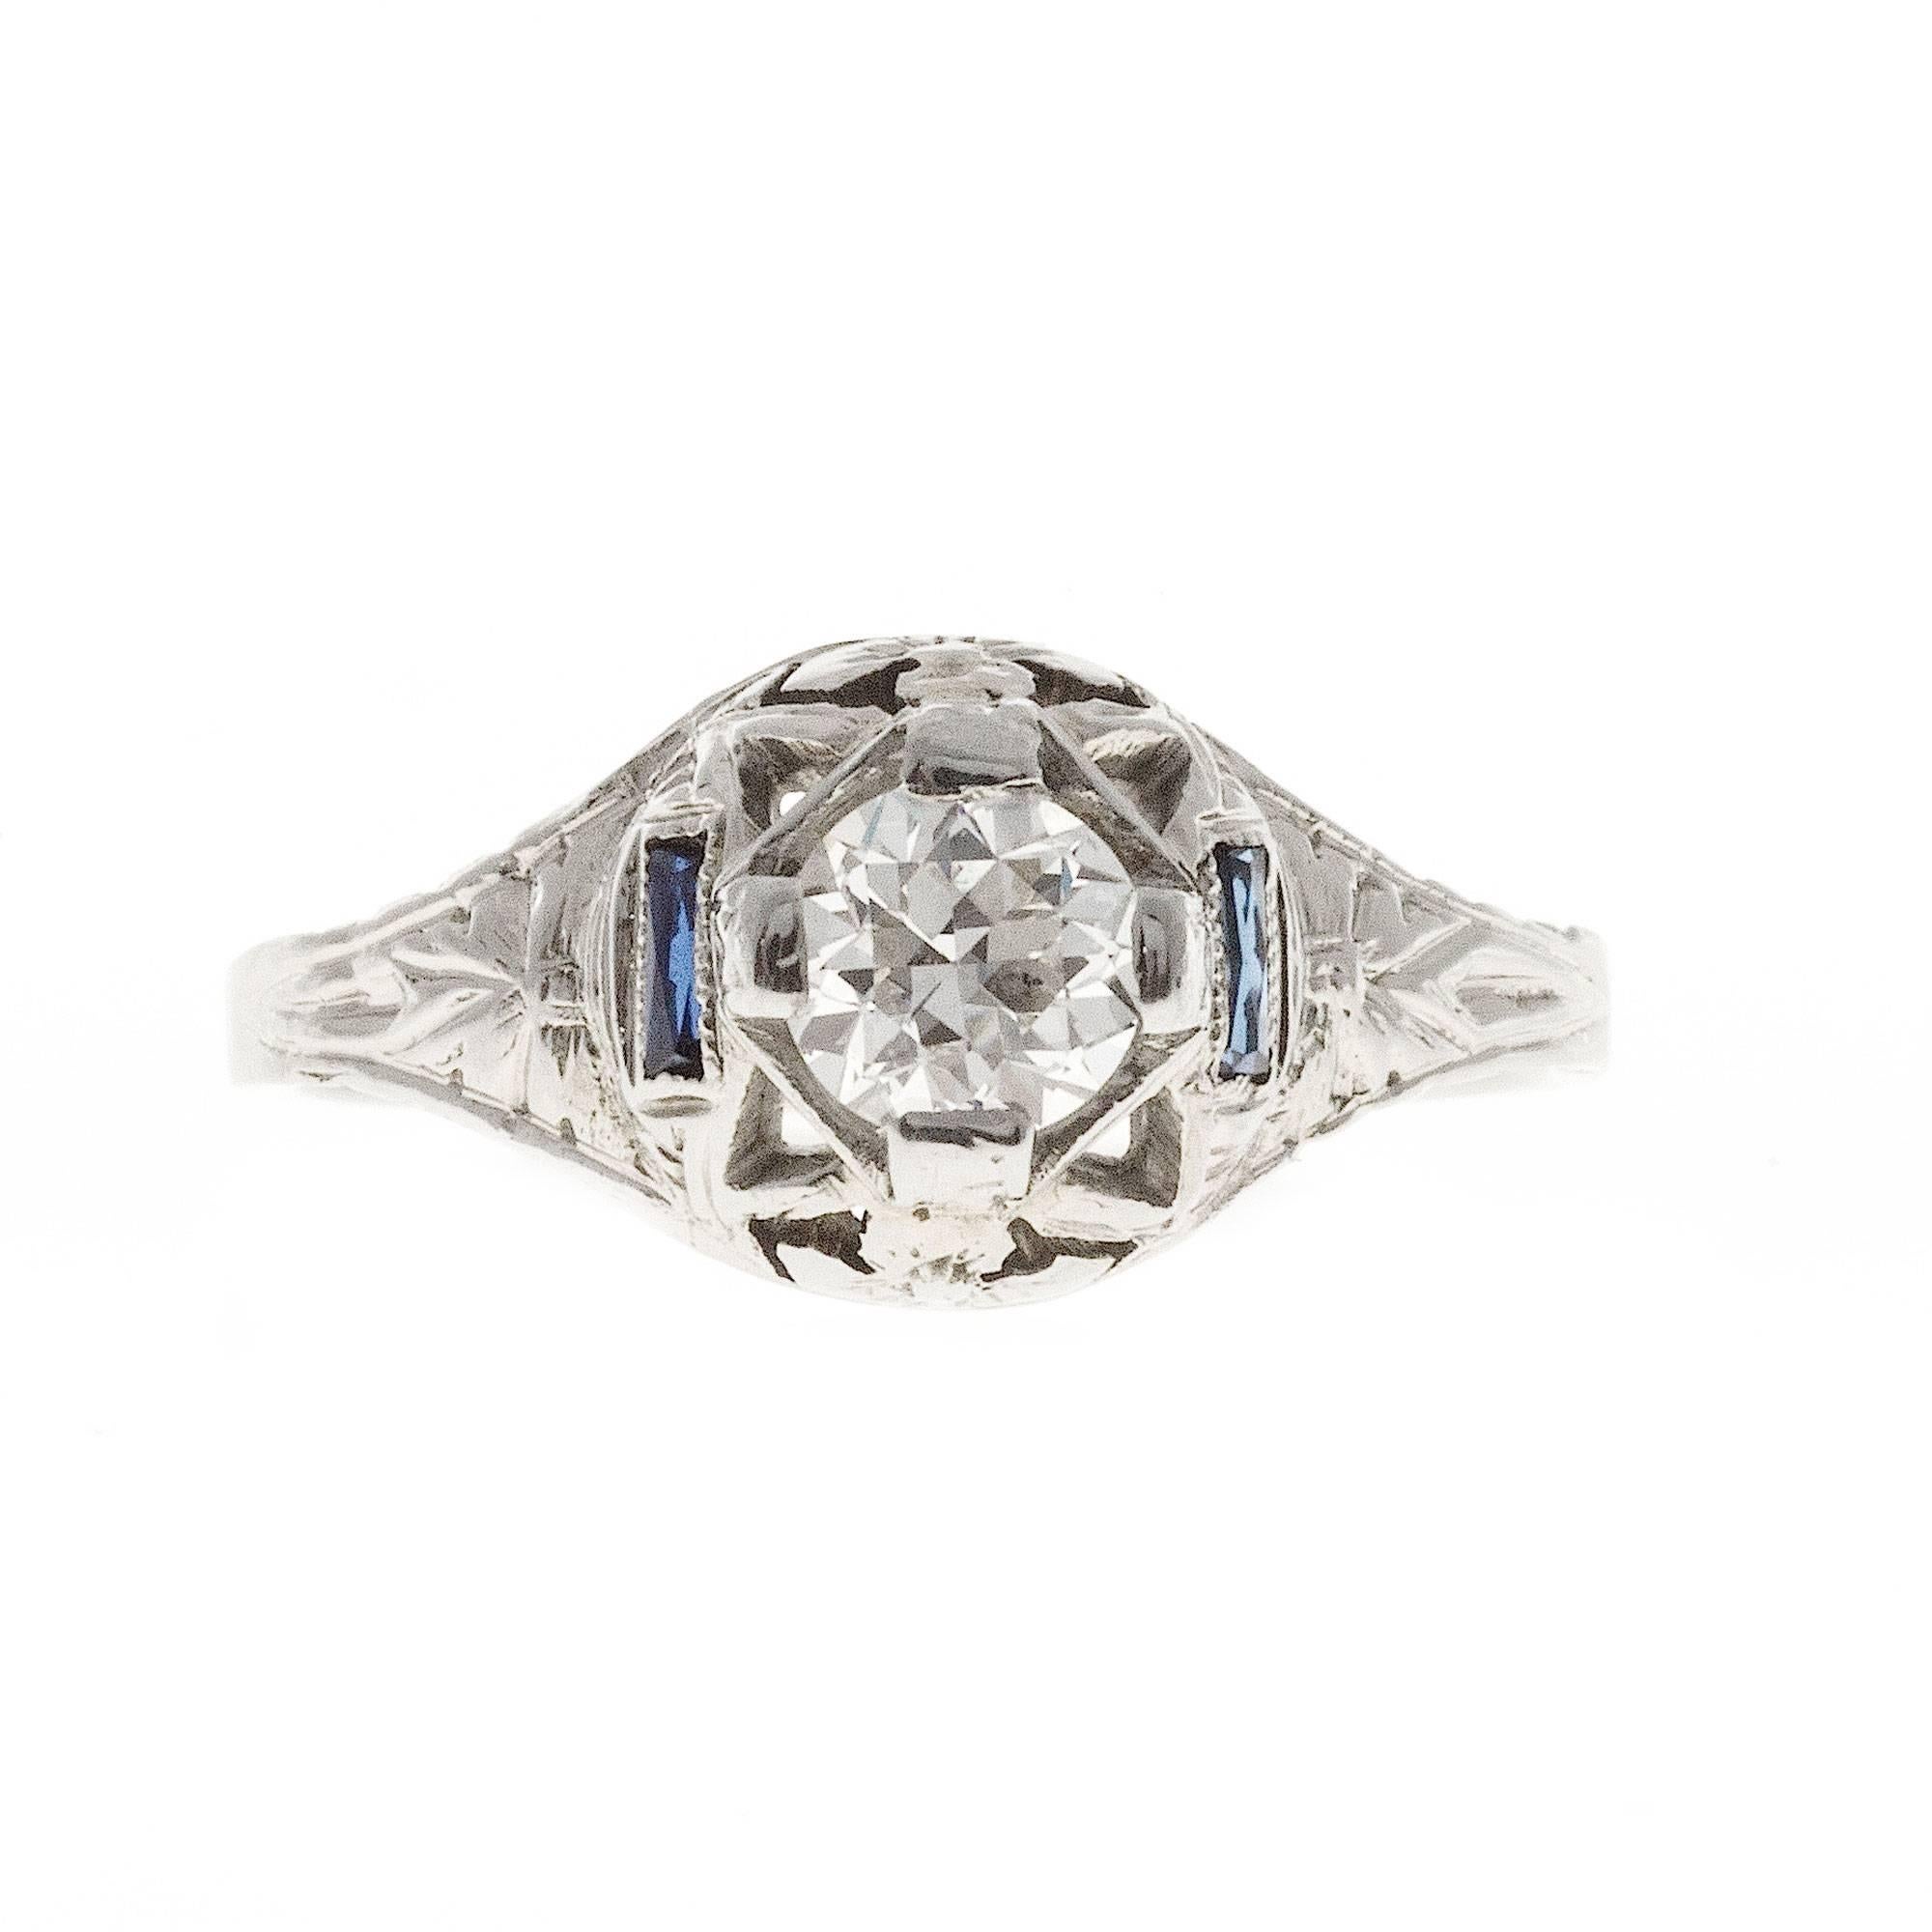 1930 18k white gold filigree engagement ring with Sapphire Baguettes and a bright sparkly old European cut transitional cut diamond.

1 transitional round diamond, approx. total weight .40cts, F – G, SI1, 
2 Calibré cut Sapphires, 3.17 x 1.10 x